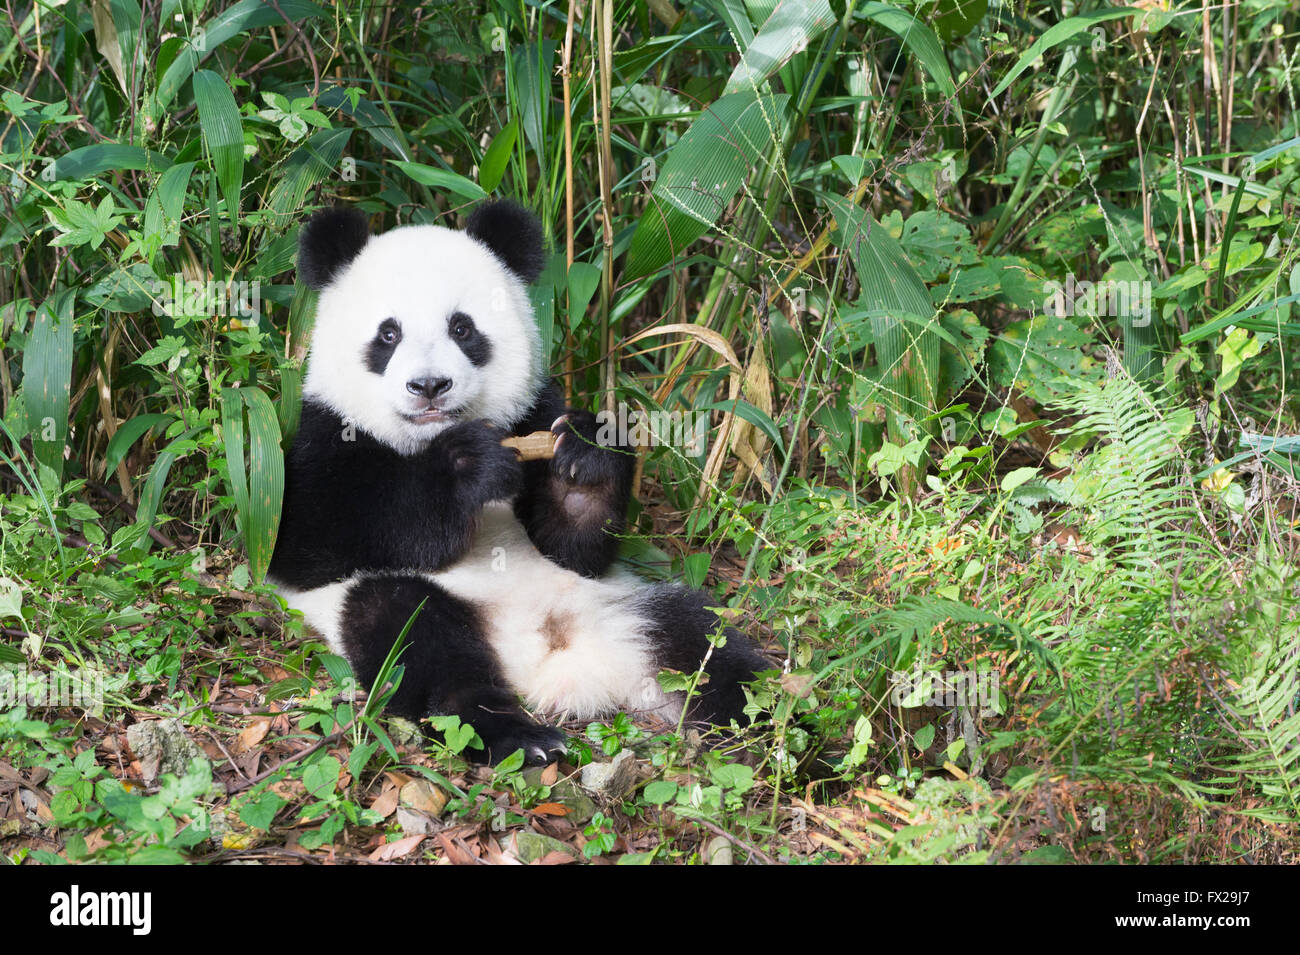 Two years aged young giant Panda (Ailuropoda melanoleuca), China Conservation and Research Centre for the Giant Pandas, China Stock Photo